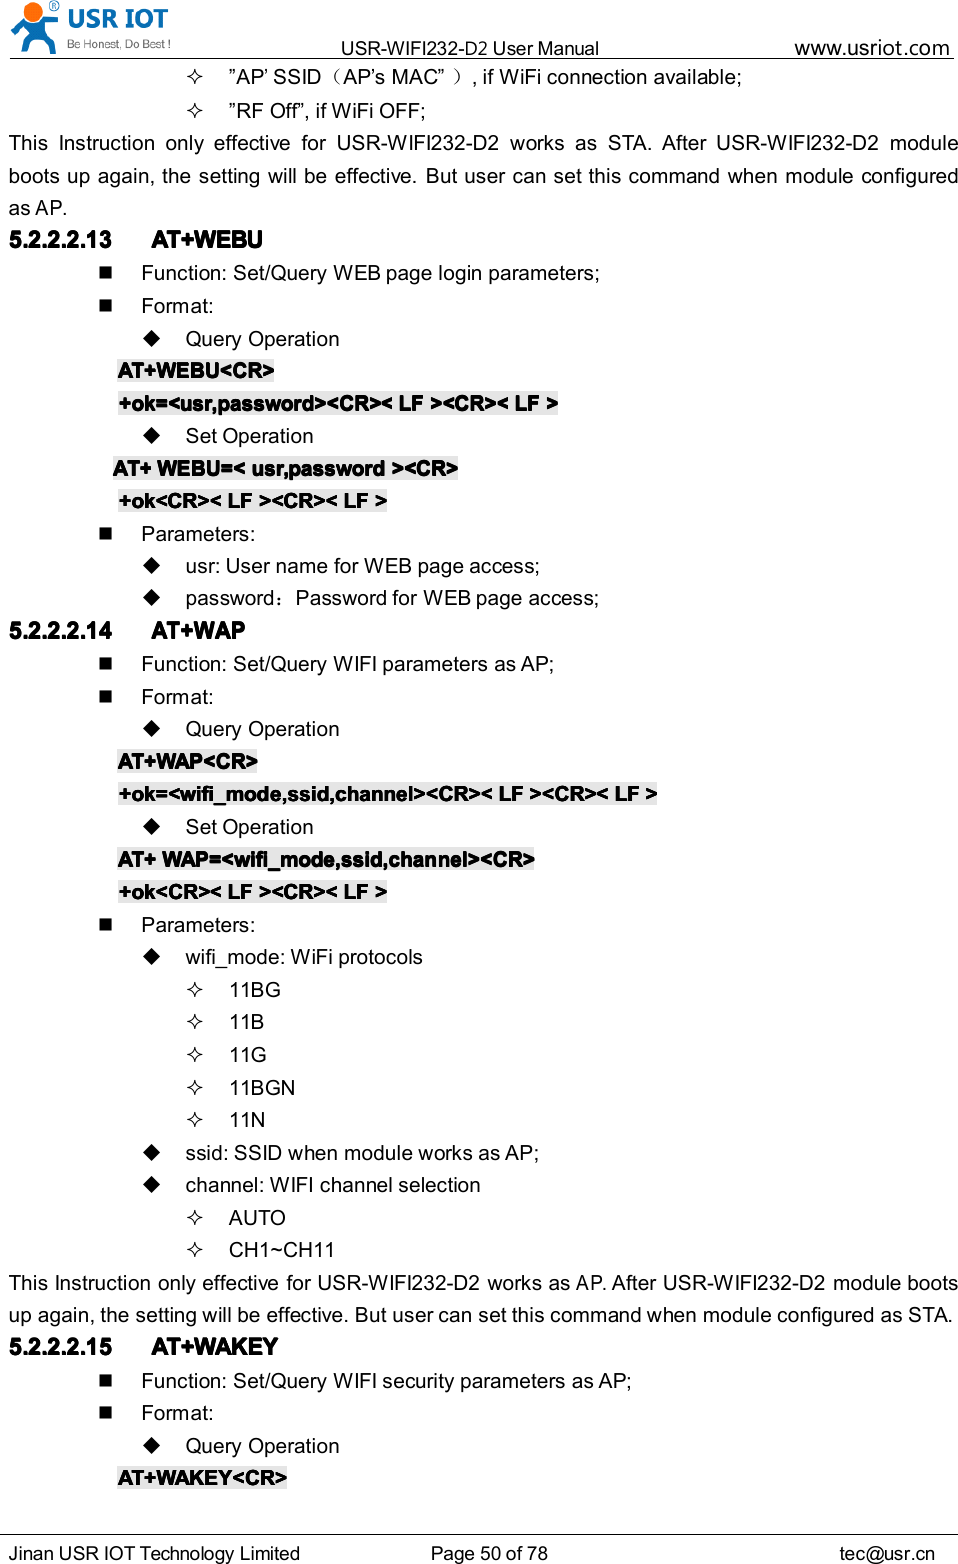 USR-WIFI232- D2 User Manual www.usr iot .comJinan USR IOT Technology Limited Page 50 of 78 tec@usr.cn” AP’SSID （AP ’ s MAC ” ）, if WiFi connection available;” RF Off ” , if WiFi OFF;This Instruction only effective for USR-WIFI232-D2 works as STA. After USR-WIFI232-D2 moduleboots up again, the setting will be effective. But user can set this command when module configuredasAP.5.2.2.2.135.2.2.2.135.2.2.2.135.2.2.2.13 AT+WEBUAT+WEBUAT+WEBUAT+WEBUFunction: Set/Query WEB page login parameters;Format:Query OperationAT+WEBU&lt;CR&gt;AT+WEBU&lt;CR&gt;AT+WEBU&lt;CR&gt;AT+WEBU&lt;CR&gt;+ok=&lt;usr,password&gt;&lt;CR&gt;&lt;+ok=&lt;usr,password&gt;&lt;CR&gt;&lt;+ok=&lt;usr,password&gt;&lt;CR&gt;&lt;+ok=&lt;usr,password&gt;&lt;CR&gt;&lt; LFLFLFLF &gt;&lt;CR&gt;&lt;&gt;&lt;CR&gt;&lt;&gt;&lt;CR&gt;&lt;&gt;&lt;CR&gt;&lt; LFLFLFLF &gt;&gt;&gt;&gt;Set OperationAT+AT+AT+AT+ WEBU=&lt;WEBU=&lt;WEBU=&lt;WEBU=&lt; usr,passwordusr,passwordusr,passwordusr,password &gt;&lt;CR&gt;&gt;&lt;CR&gt;&gt;&lt;CR&gt;&gt;&lt;CR&gt;+ok&lt;CR&gt;&lt;+ok&lt;CR&gt;&lt;+ok&lt;CR&gt;&lt;+ok&lt;CR&gt;&lt; LFLFLFLF &gt;&lt;CR&gt;&lt;&gt;&lt;CR&gt;&lt;&gt;&lt;CR&gt;&lt;&gt;&lt;CR&gt;&lt; LFLFLFLF &gt;&gt;&gt;&gt;Parameters:usr: User name for WEB page access;password ：Password for WEB page access;5.2.2.2.145.2.2.2.145.2.2.2.145.2.2.2.14AT+WAPAT+WAPAT+WAPAT+WAPFunction: Set/Query WIFI parameters as AP;Format:Query OperationAT+WAP&lt;CR&gt;AT+WAP&lt;CR&gt;AT+WAP&lt;CR&gt;AT+WAP&lt;CR&gt;+ok=&lt;wifi_mode,ssid,channel&gt;&lt;CR&gt;&lt;+ok=&lt;wifi_mode,ssid,channel&gt;&lt;CR&gt;&lt;+ok=&lt;wifi_mode,ssid,channel&gt;&lt;CR&gt;&lt;+ok=&lt;wifi_mode,ssid,channel&gt;&lt;CR&gt;&lt; LFLFLFLF &gt;&lt;CR&gt;&lt;&gt;&lt;CR&gt;&lt;&gt;&lt;CR&gt;&lt;&gt;&lt;CR&gt;&lt; LFLFLFLF &gt;&gt;&gt;&gt;Set OperationAT+AT+AT+AT+ WAP=&lt;wifi_mode,ssid,channel&gt;&lt;CR&gt;WAP=&lt;wifi_mode,ssid,channel&gt;&lt;CR&gt;WAP=&lt;wifi_mode,ssid,channel&gt;&lt;CR&gt;WAP=&lt;wifi_mode,ssid,channel&gt;&lt;CR&gt;+ok&lt;CR&gt;&lt;+ok&lt;CR&gt;&lt;+ok&lt;CR&gt;&lt;+ok&lt;CR&gt;&lt; LFLFLFLF &gt;&lt;CR&gt;&lt;&gt;&lt;CR&gt;&lt;&gt;&lt;CR&gt;&lt;&gt;&lt;CR&gt;&lt; LFLFLFLF &gt;&gt;&gt;&gt;Parameters:wifi_mode: WiFi protocols11BG11B11G11BGN11Nssid: SSID when module works as AP;channel: WIFI channel selectionAUTOCH1~CH11This Instruction only effective for USR-WIFI232-D2 works asAP.After USR-WIFI232-D2 module bootsup again, the setting will be effective. But user can set this command when module configured as STA.5.2.2.2.155.2.2.2.155.2.2.2.155.2.2.2.15 AT+WAKEYAT+WAKEYAT+WAKEYAT+WAKEYFunction: Set/Query WIFI security parameters as AP;Format:Query OperationAT+WAKEY&lt;CR&gt;AT+WAKEY&lt;CR&gt;AT+WAKEY&lt;CR&gt;AT+WAKEY&lt;CR&gt;